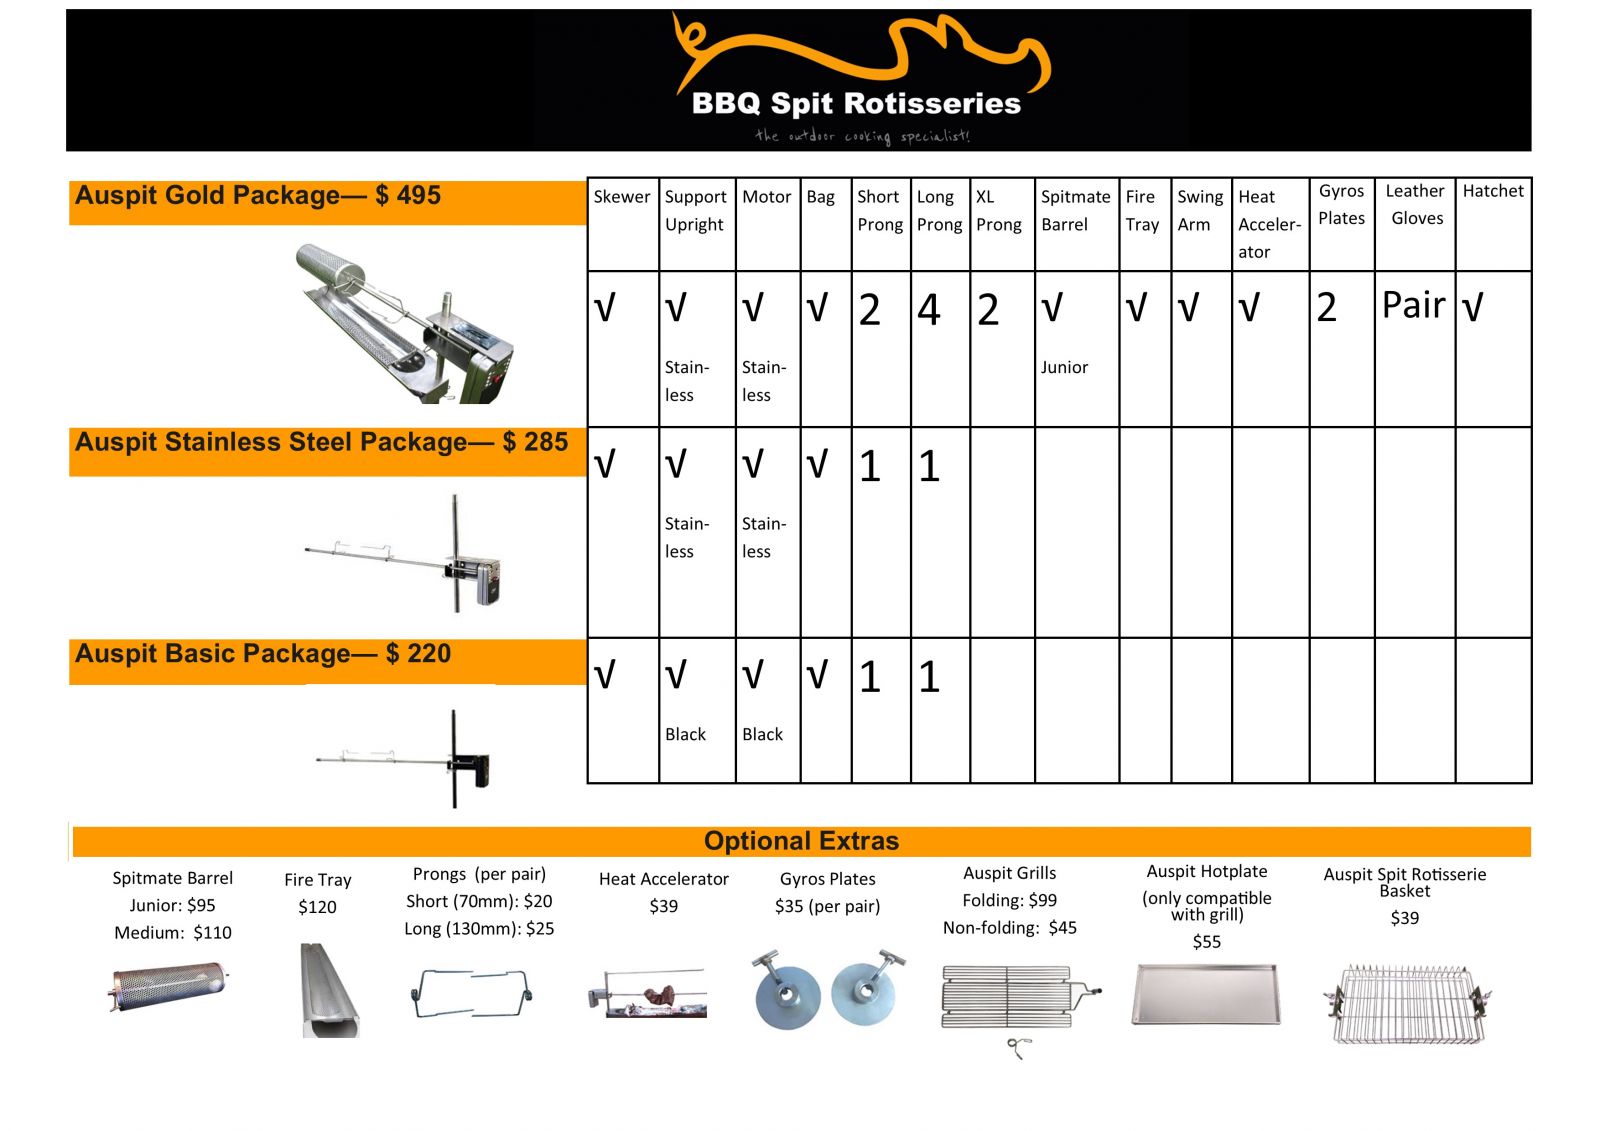 This is an image with a link to the Auspit portable camping spit rotisserie comparison guide